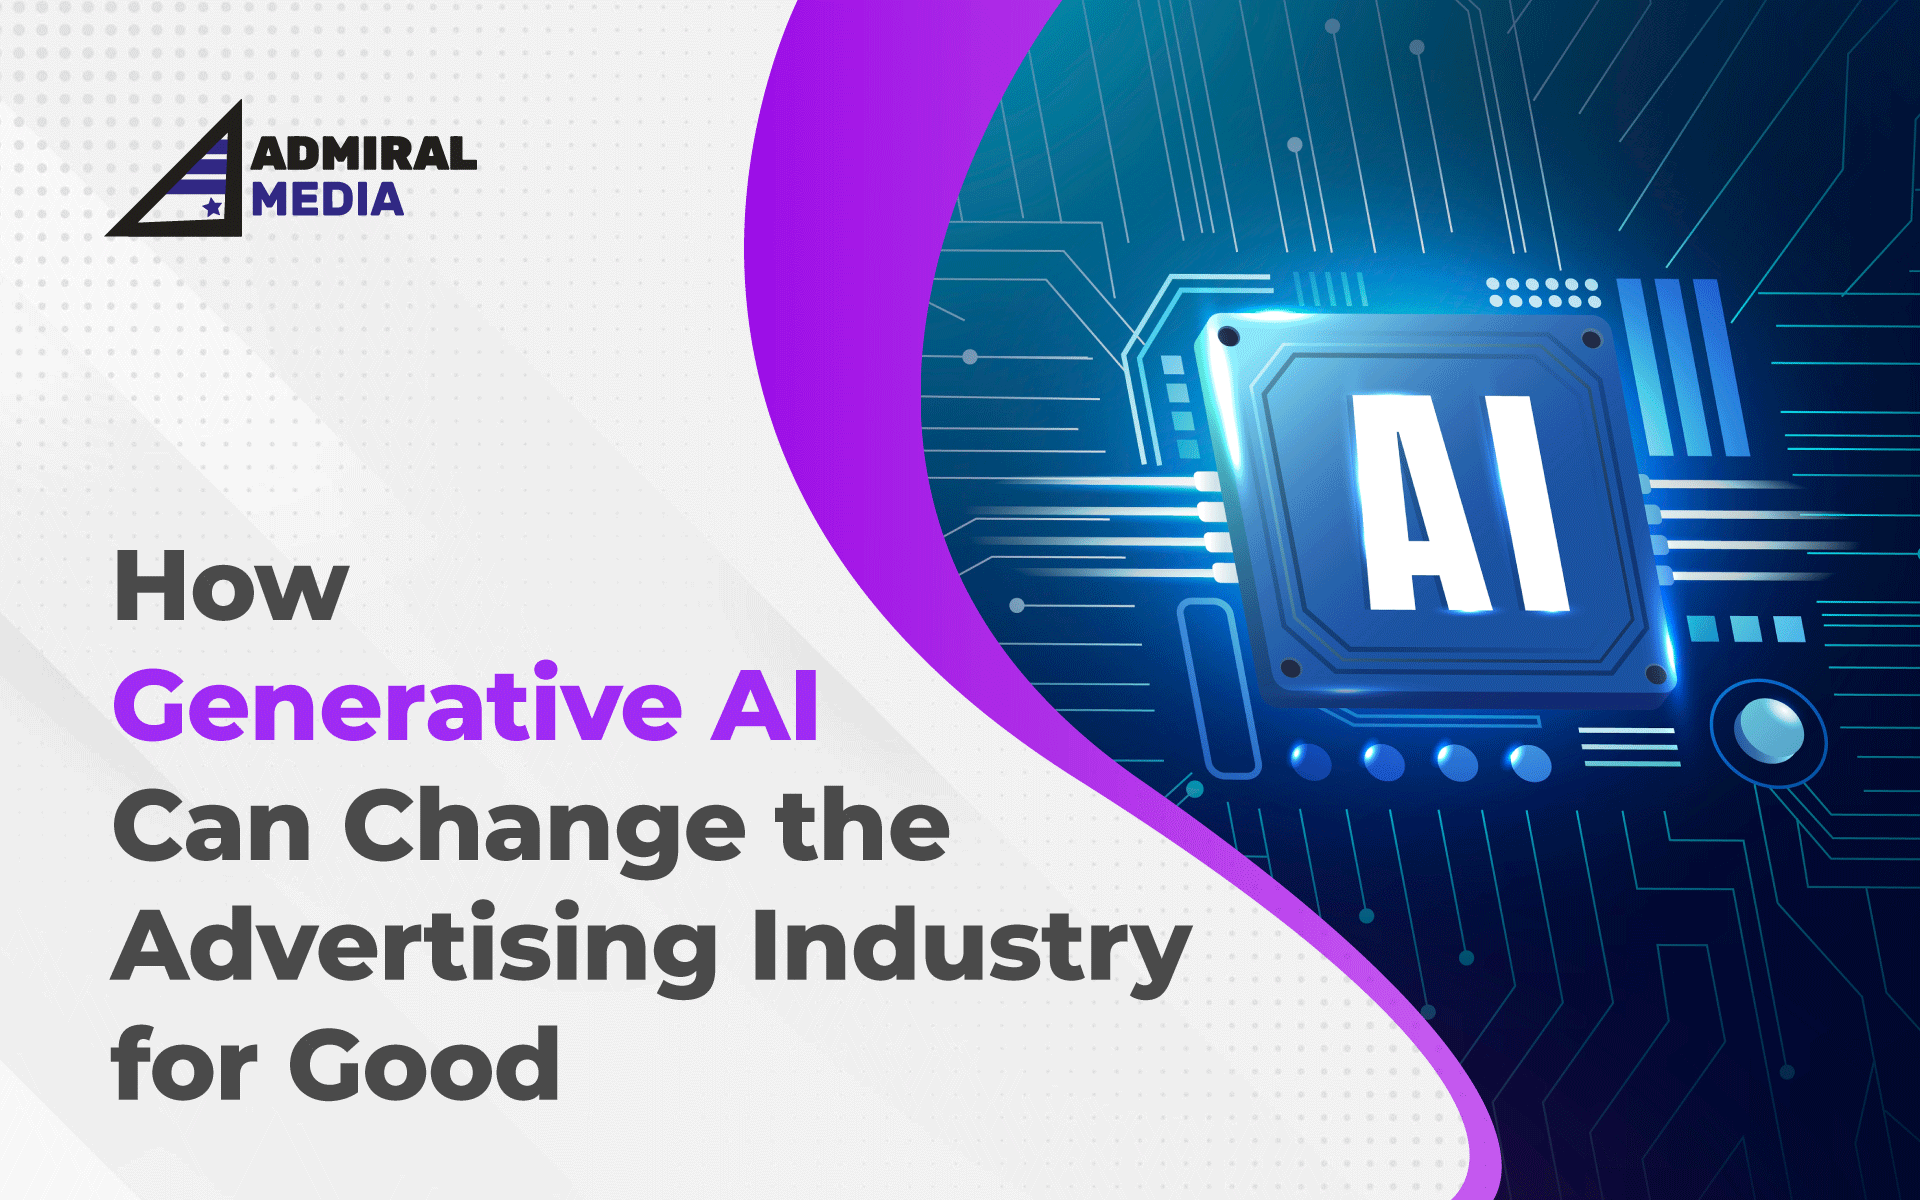 How Generative AI Can Change the Advertising Industry for Good